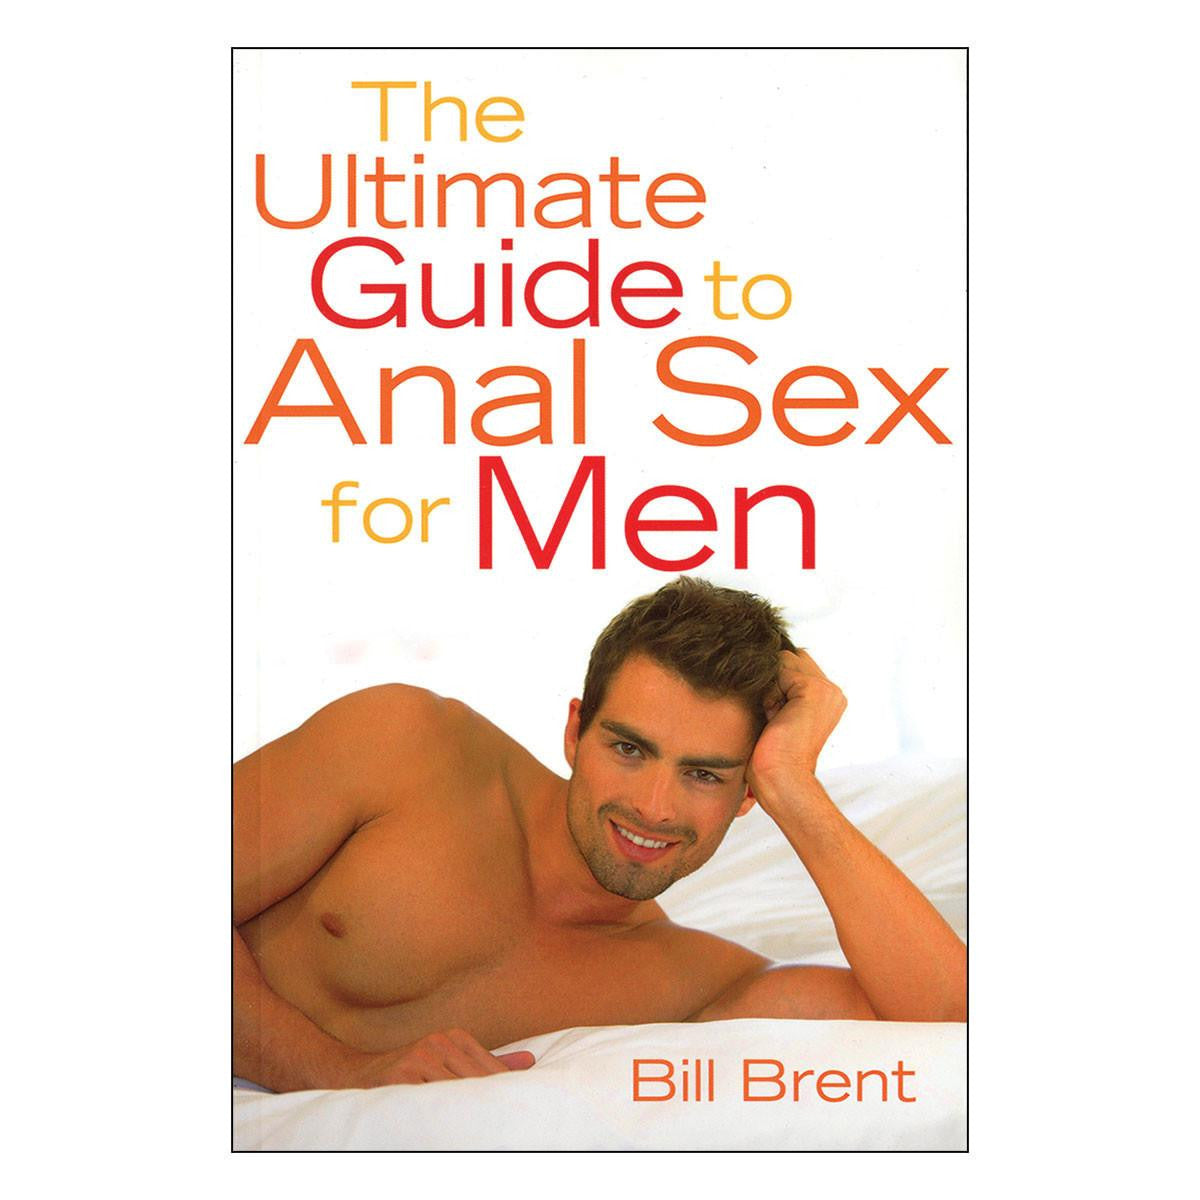 The Ultimate Guide to Anal Sex for Men by Bill Brent - Hamilton Park Electronics